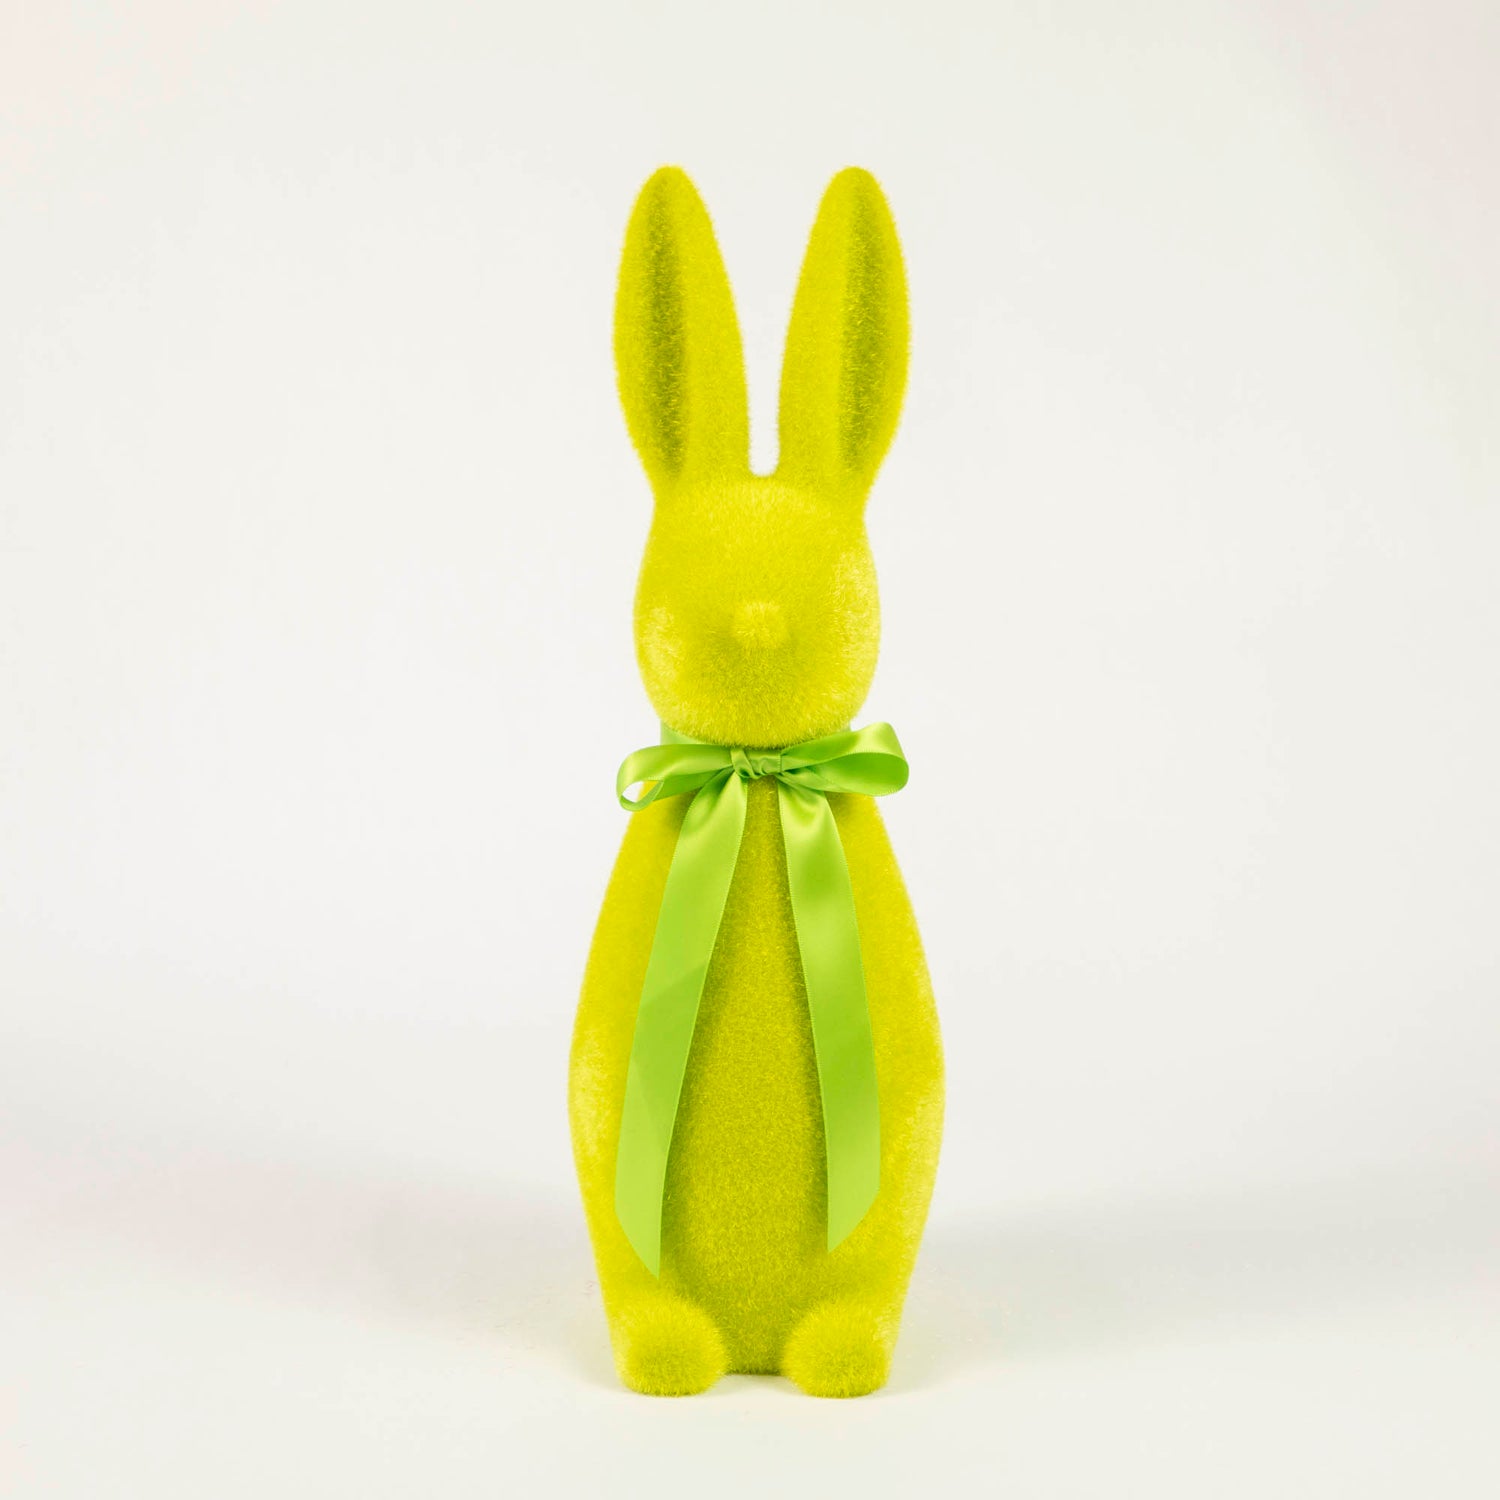 An adorable Glitterville bunny wearing a green bow, perfect for Easter celebration or as a delightful gift.